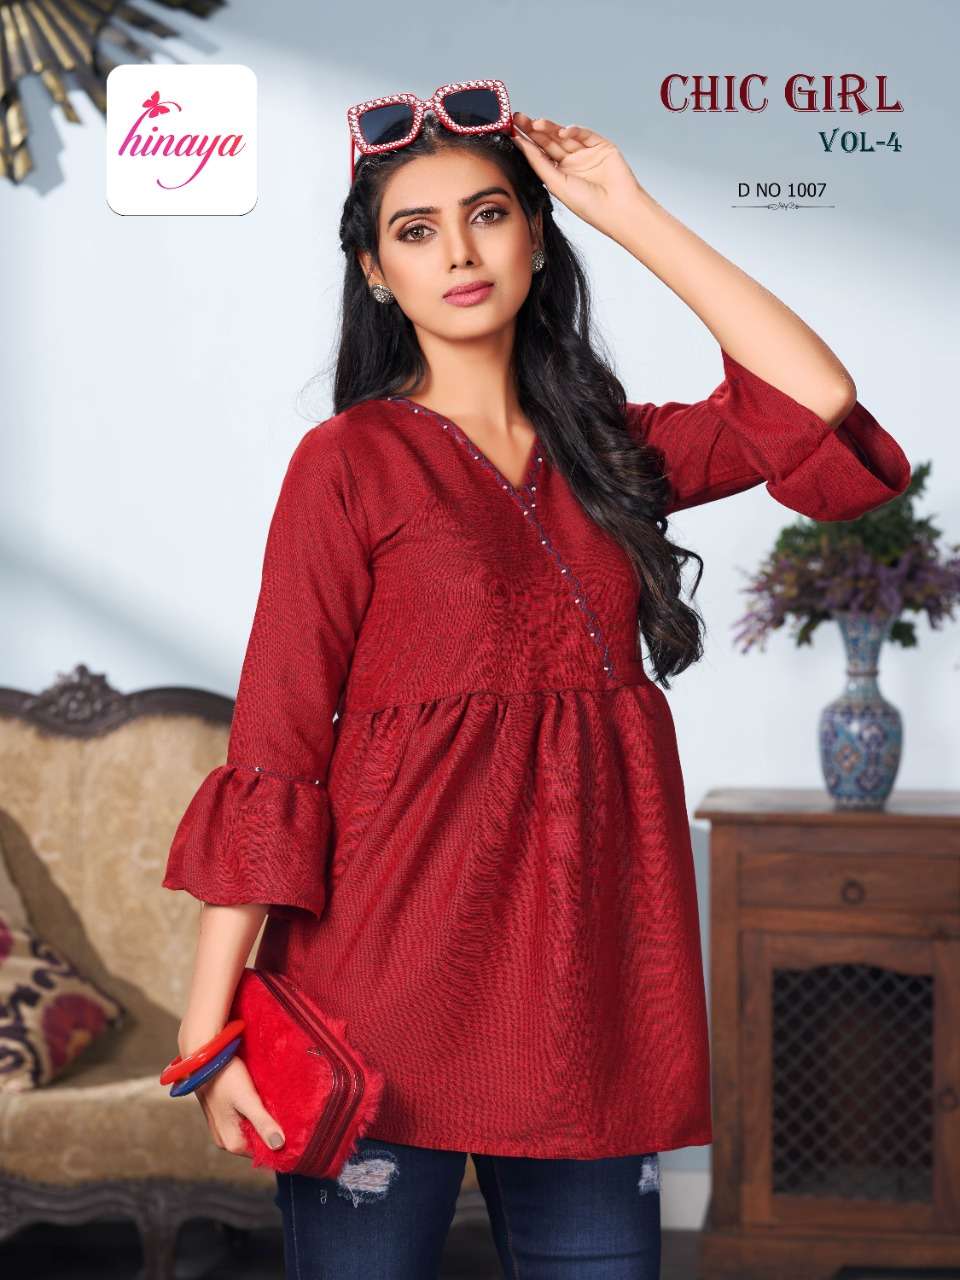 CHIC GIRL VOL-4 BY HINAYA 1001 TO 1010 SERIES BEAUTIFUL STYLISH FANCY COLORFUL CASUAL WEAR & ETHNIC WEAR RAYON TWO TONE TOPS AT WHOLESALE PRICE